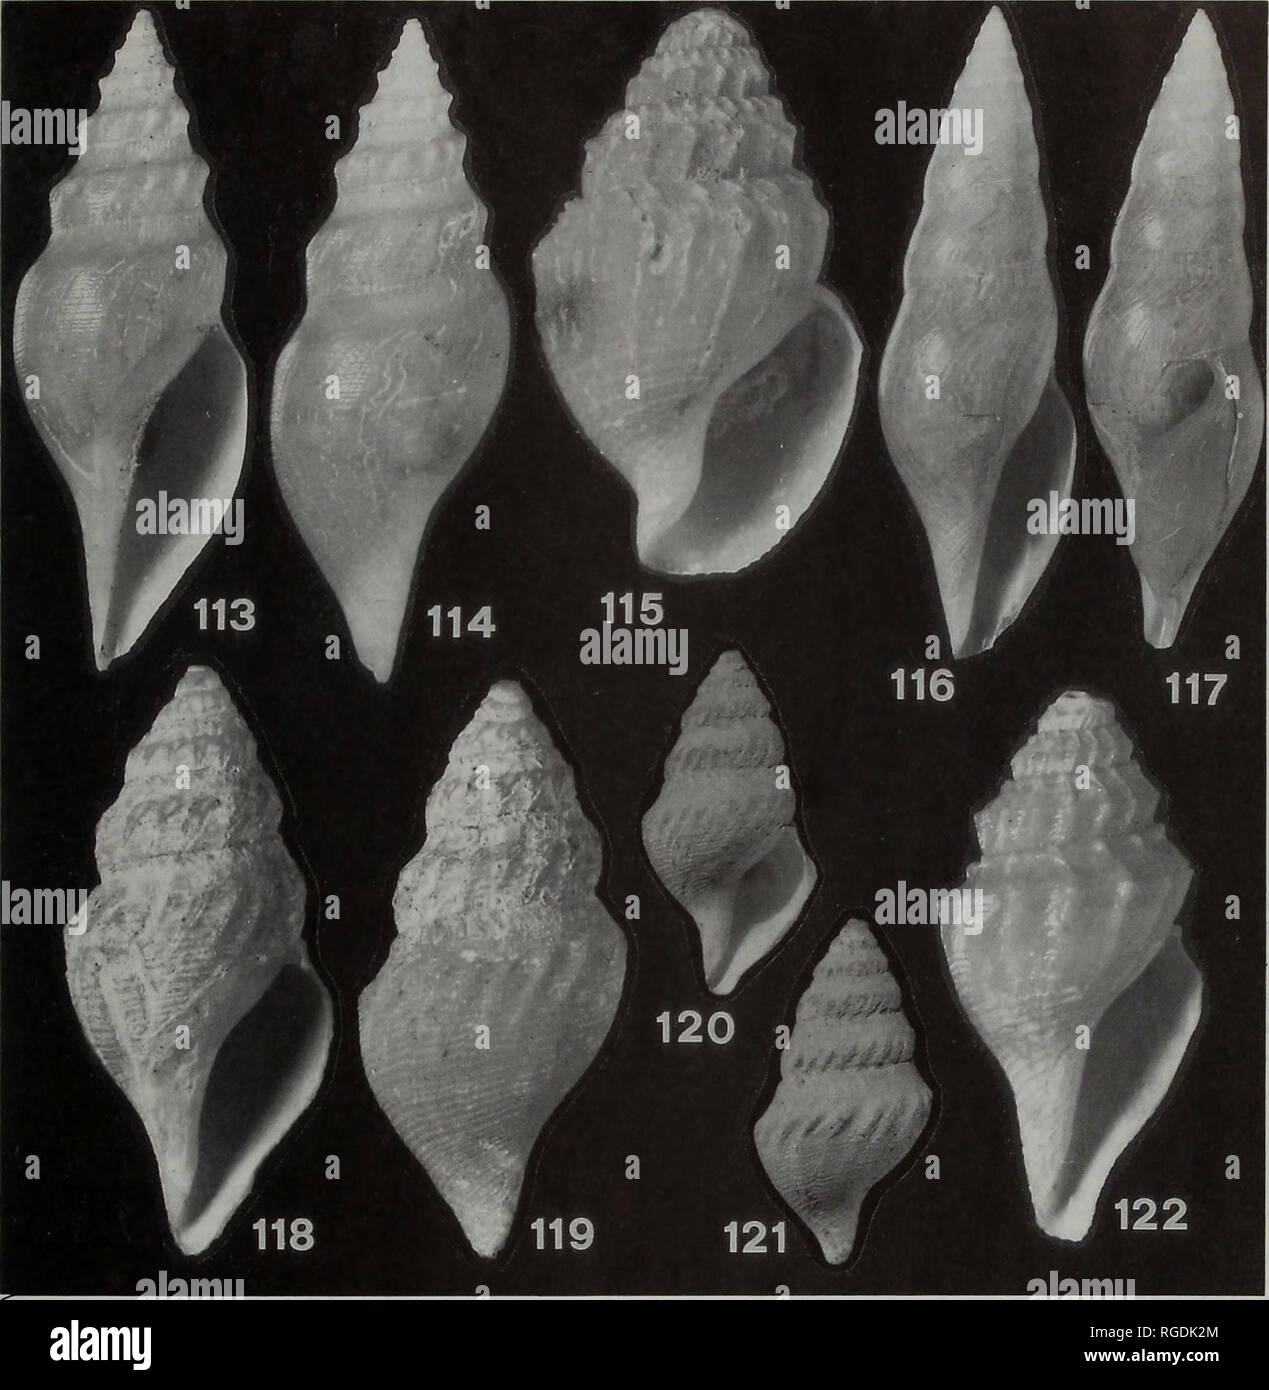 . Bulletin of the Natural History Museum Zoology. DEEP-SEA CONOIDEAN GASTROPODS 27. Figs 113-122 Daphnellinae and Mangeliinae. 113,114 -Gymnobela (Theta) daphnelloides (Dall, 1895), stn 118, H = 27.0; 115- Mioawateria exten- saeformis (Schepman, 1913), stn 26, H = 9.9 mm; 116,117- Xanthodaphne maldivica Sysoev, new species, holotype; 118-121 - Benthomangelia brachytona (Watson, 1881), stn 119, H = 17.1 mm (118,119) and lectotype, BM(NH) 1887.2.9.1034, H = 15.1 mm (120,121); 122- B. trophonoidea Thiele, 1925, stn 185, H = 10.0 mm. latter, in its turn, is too poorly distinguished from Gymnobela  Stock Photo